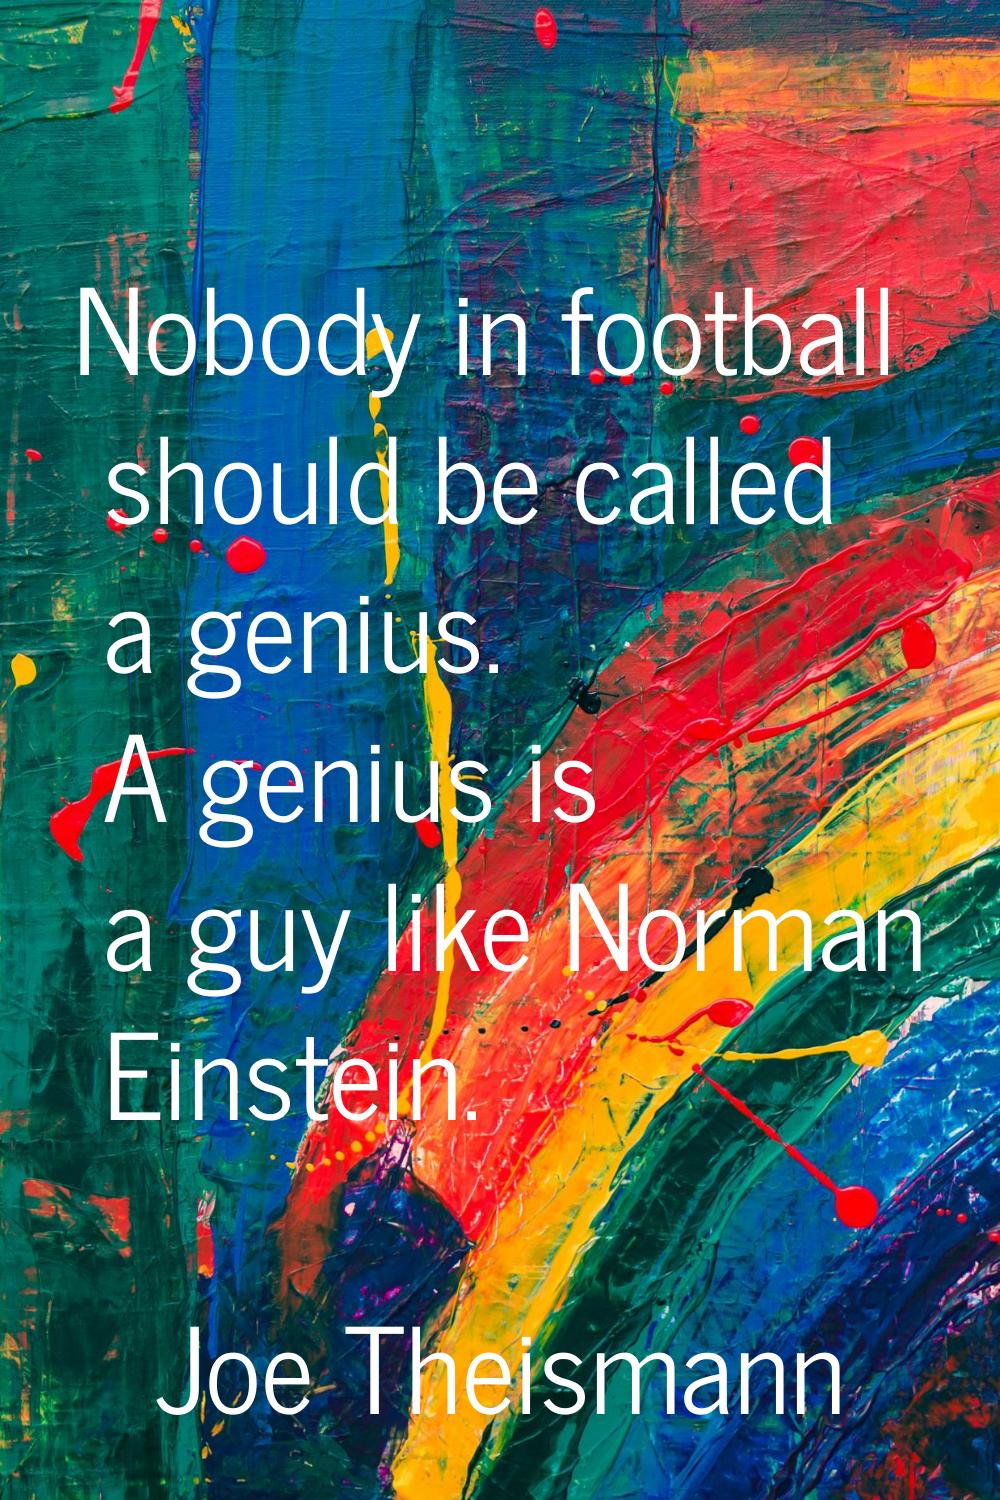 Nobody in football should be called a genius. A genius is a guy like Norman Einstein.